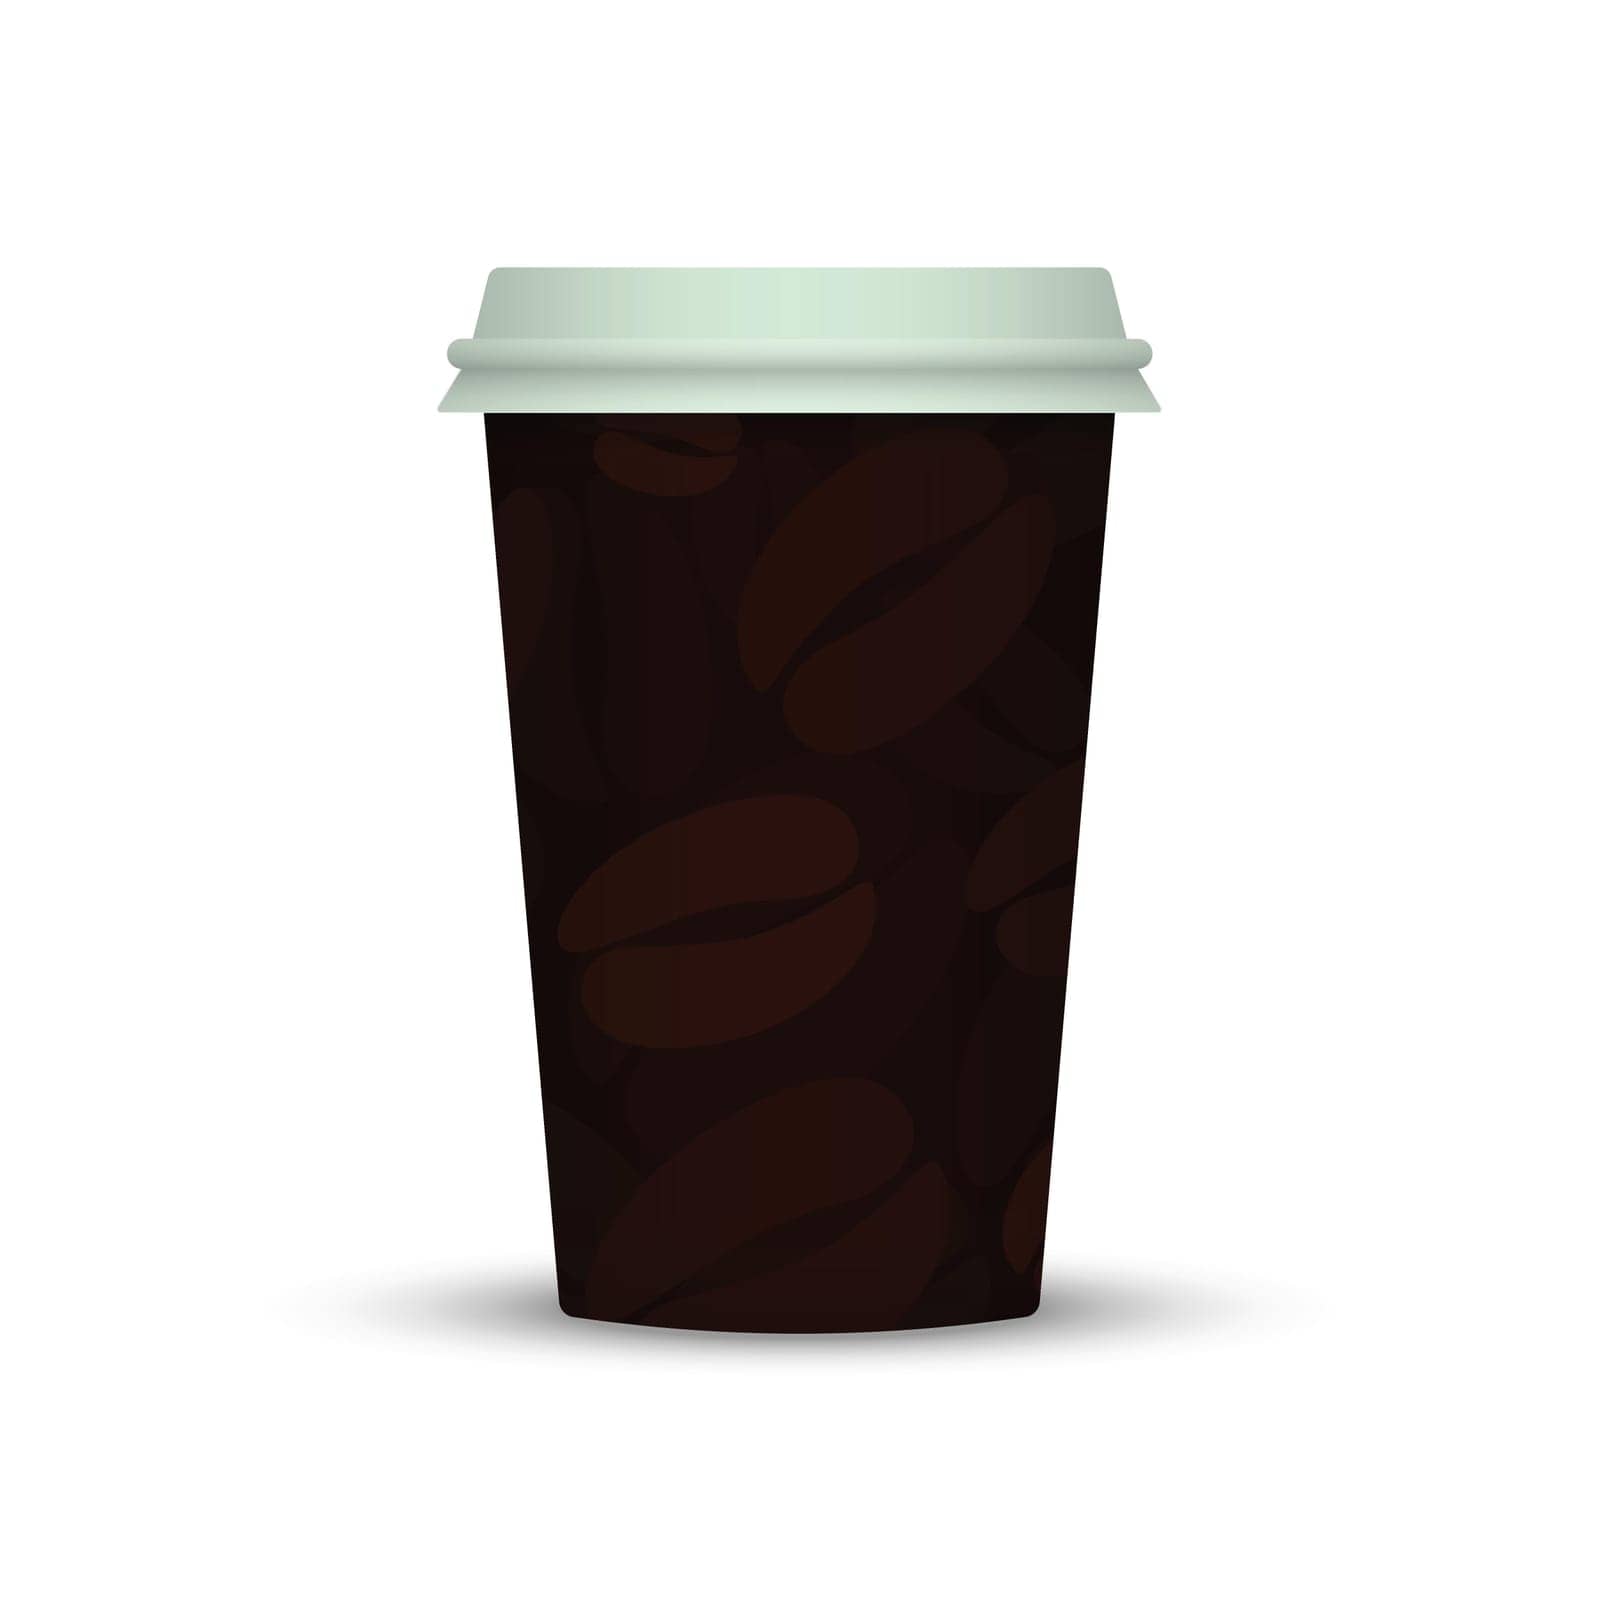 container,mobility,away,shadow,line,lid,icon,cappuccino,mocha,takeout,hot,long,latte,cover,caffeine,paper,flat,decaf,beverage,vector,bean,energy,espresso,set,refreshment,break,restaurant,smoke,holder,portable,brown,takeaway,food,drink,disposable,morning,take,fast,cafe,liquid,coffee,fresh,breakfast,mug,object,cup by ogqcorp